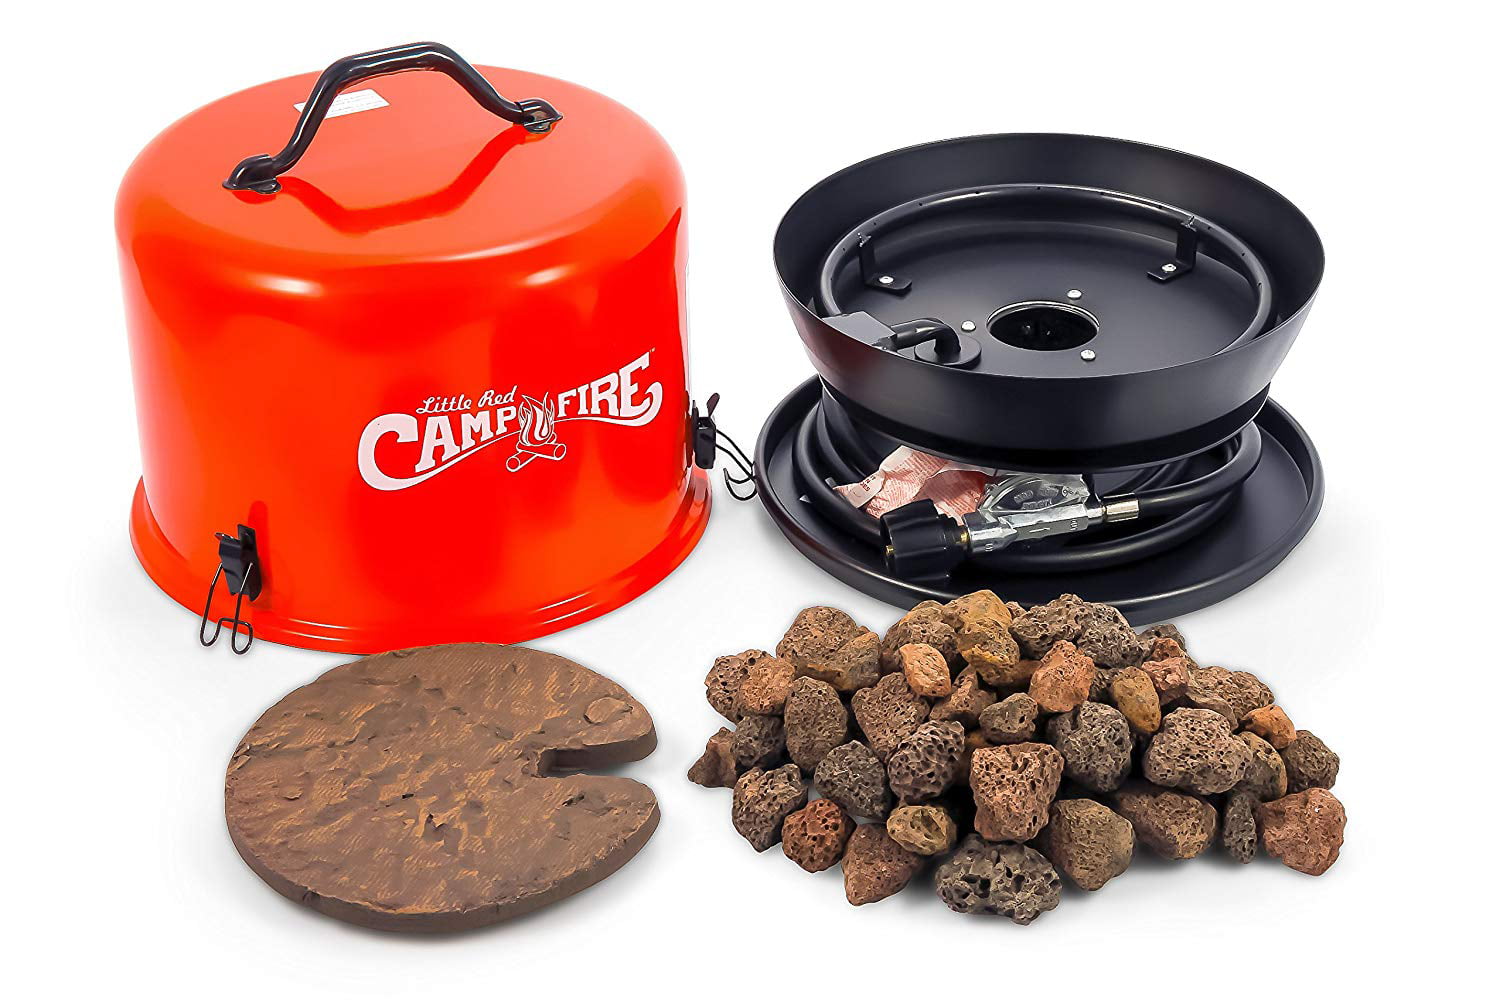 Camco Little Red Campfire 11 25 Inch Portable Propane Outdoor Camp Fire Approved For Rv Campgrounds 65 000 Btu S Includes 8 Foot Propane Hose 58031 Walmart Com